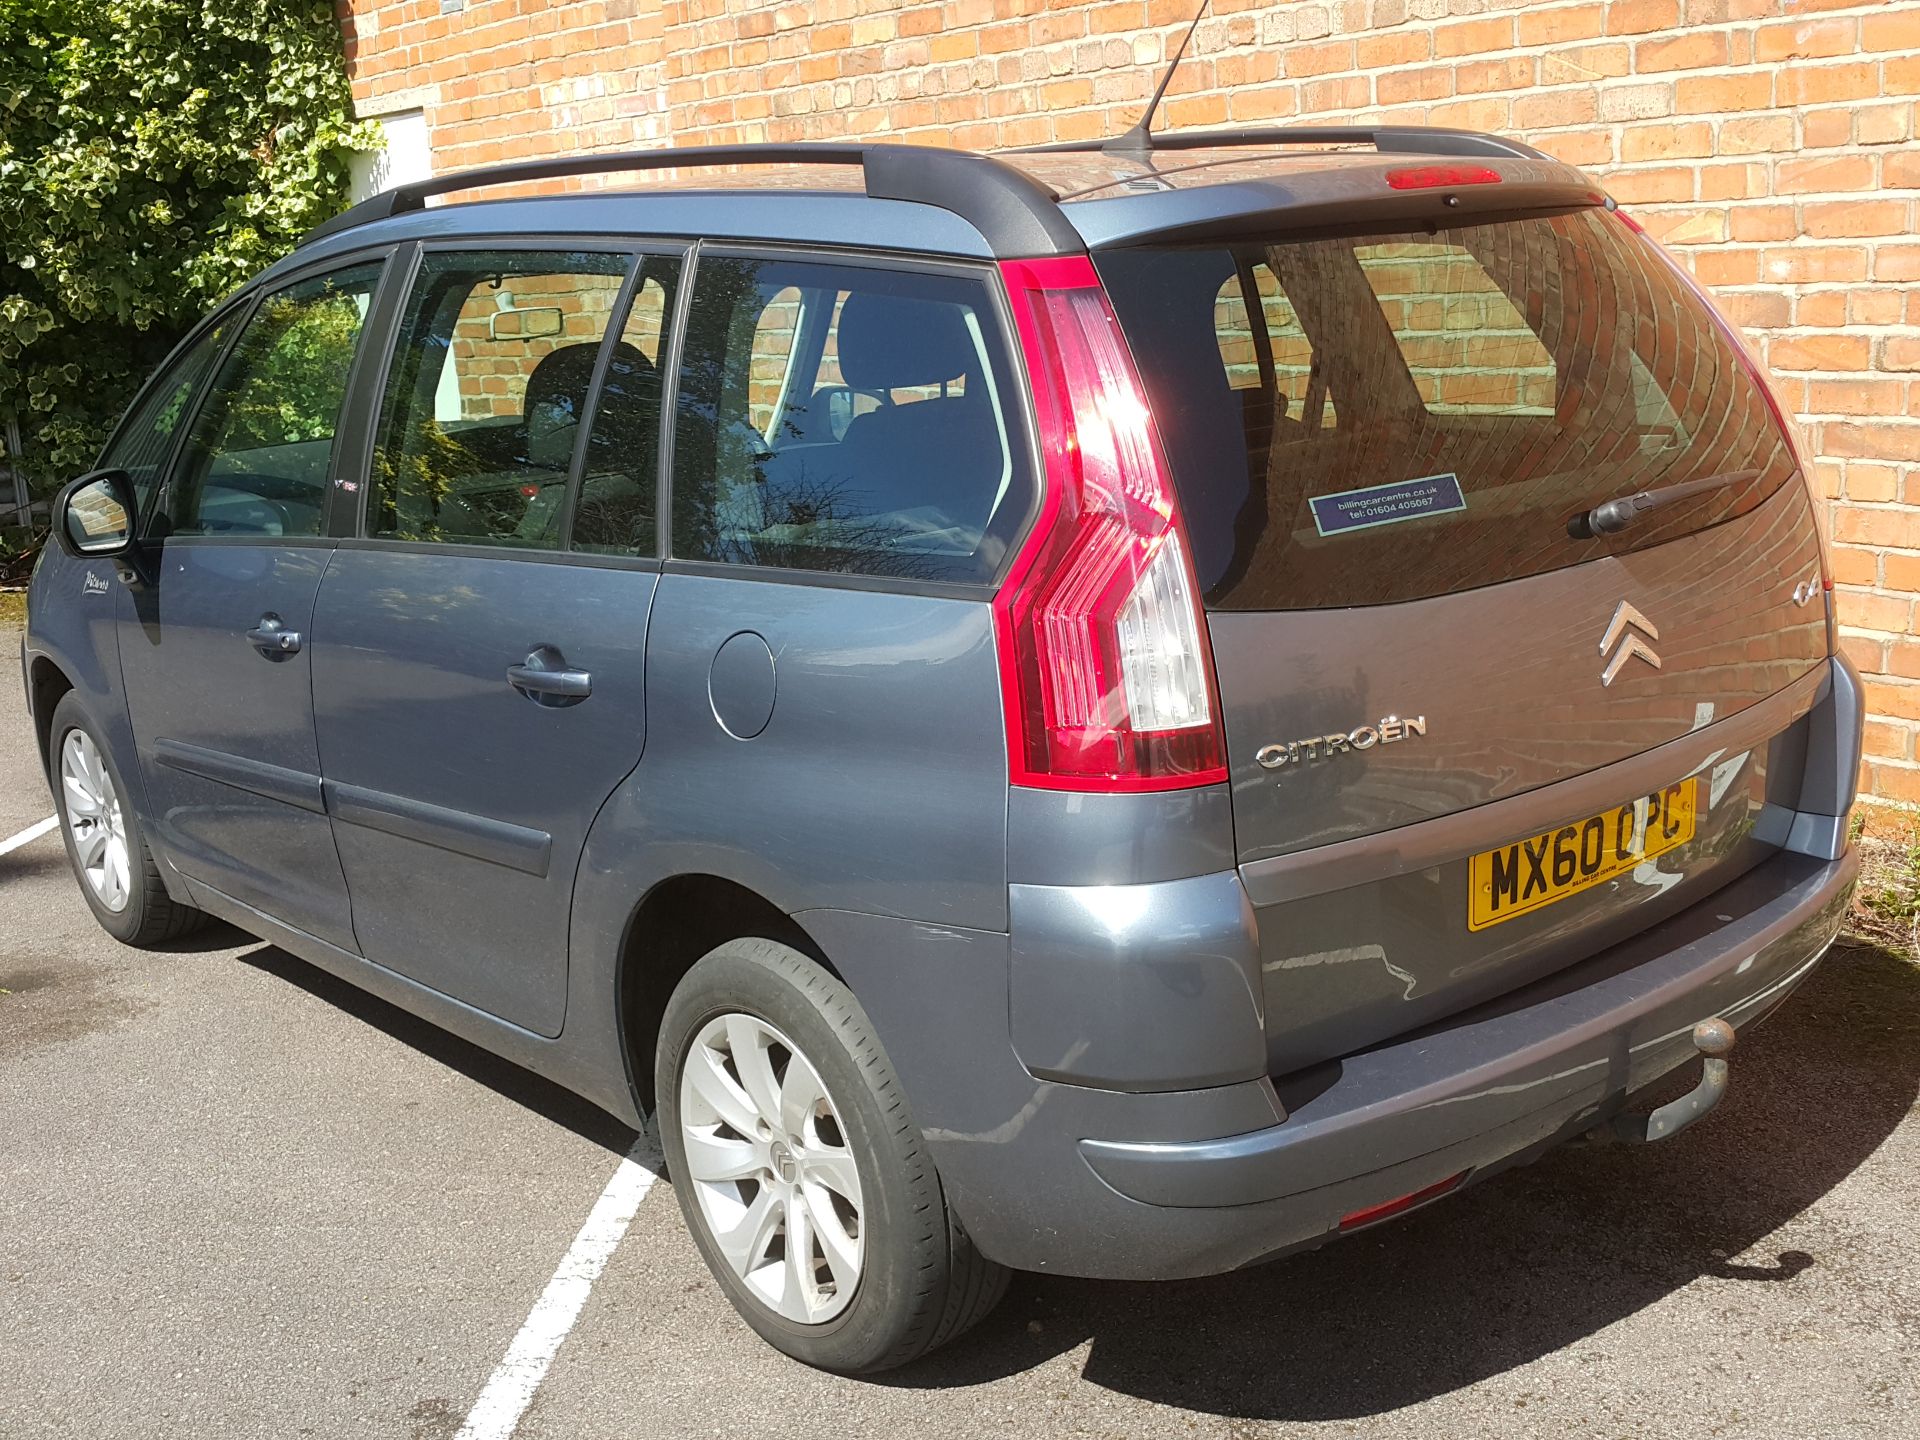 CITROEN C4 GRAND PICASSO VTR+ 7 SEATER - Image 8 of 19